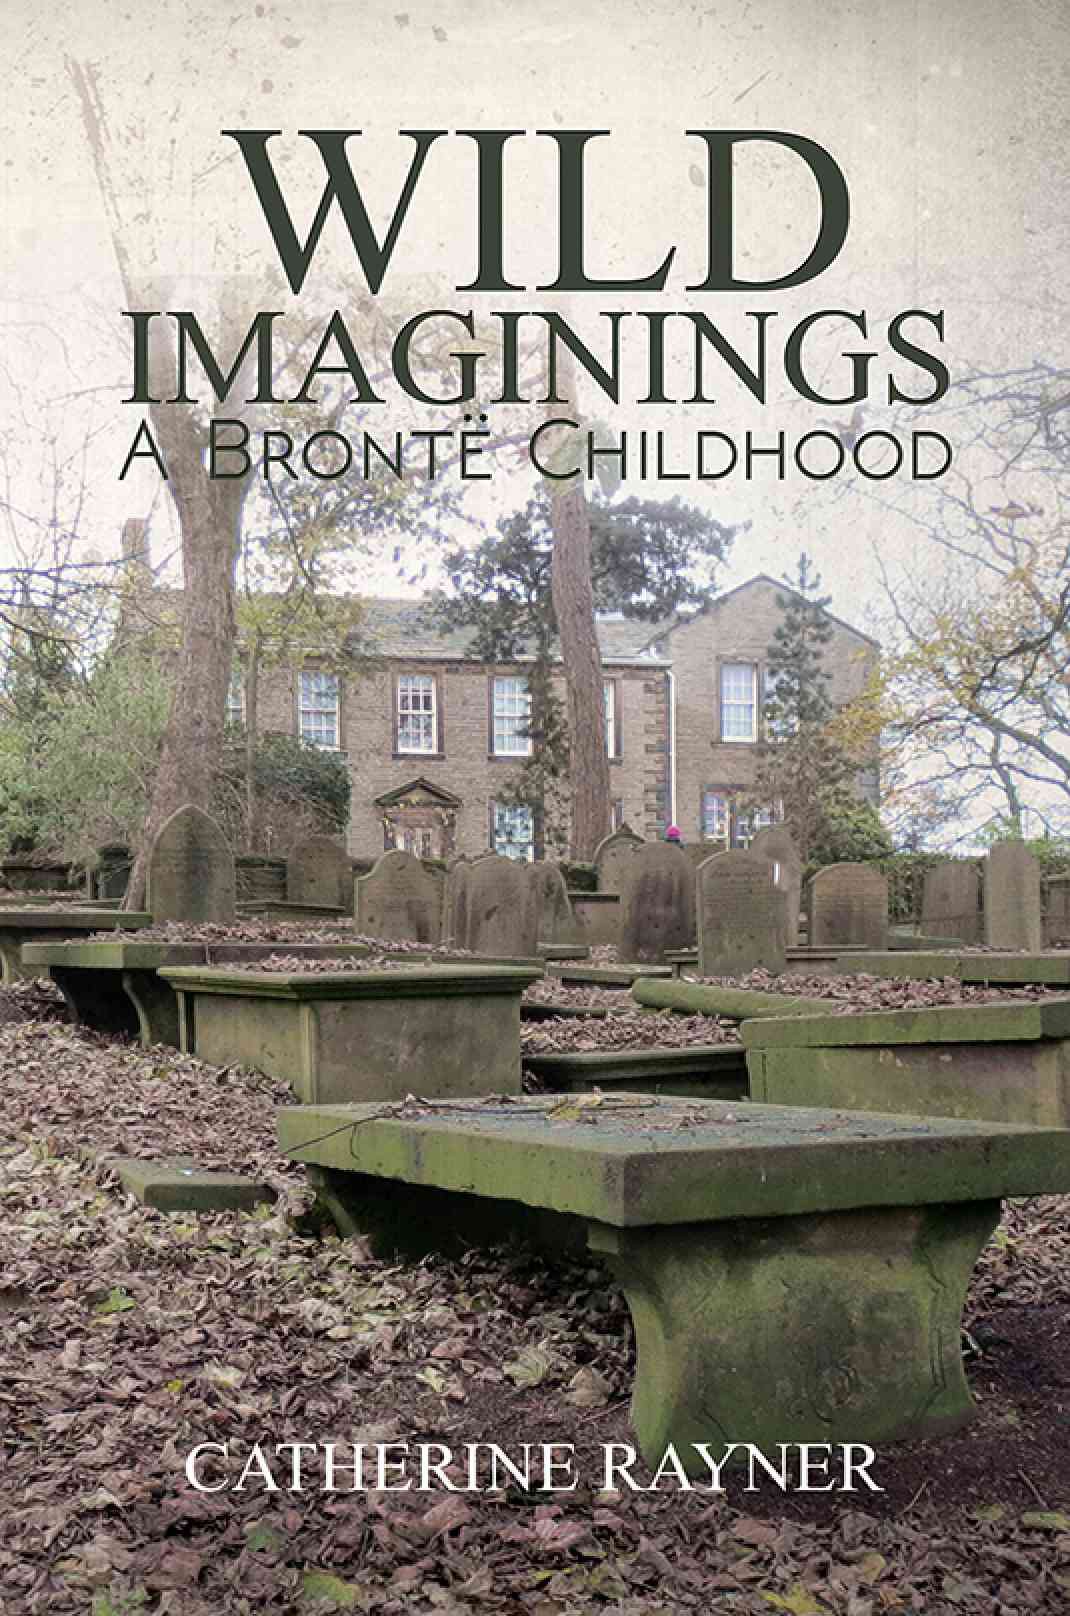 The Cartshow interviewed Catherine Rayner, the author of ‘Wild Imaginings: A Bronte Childhood’